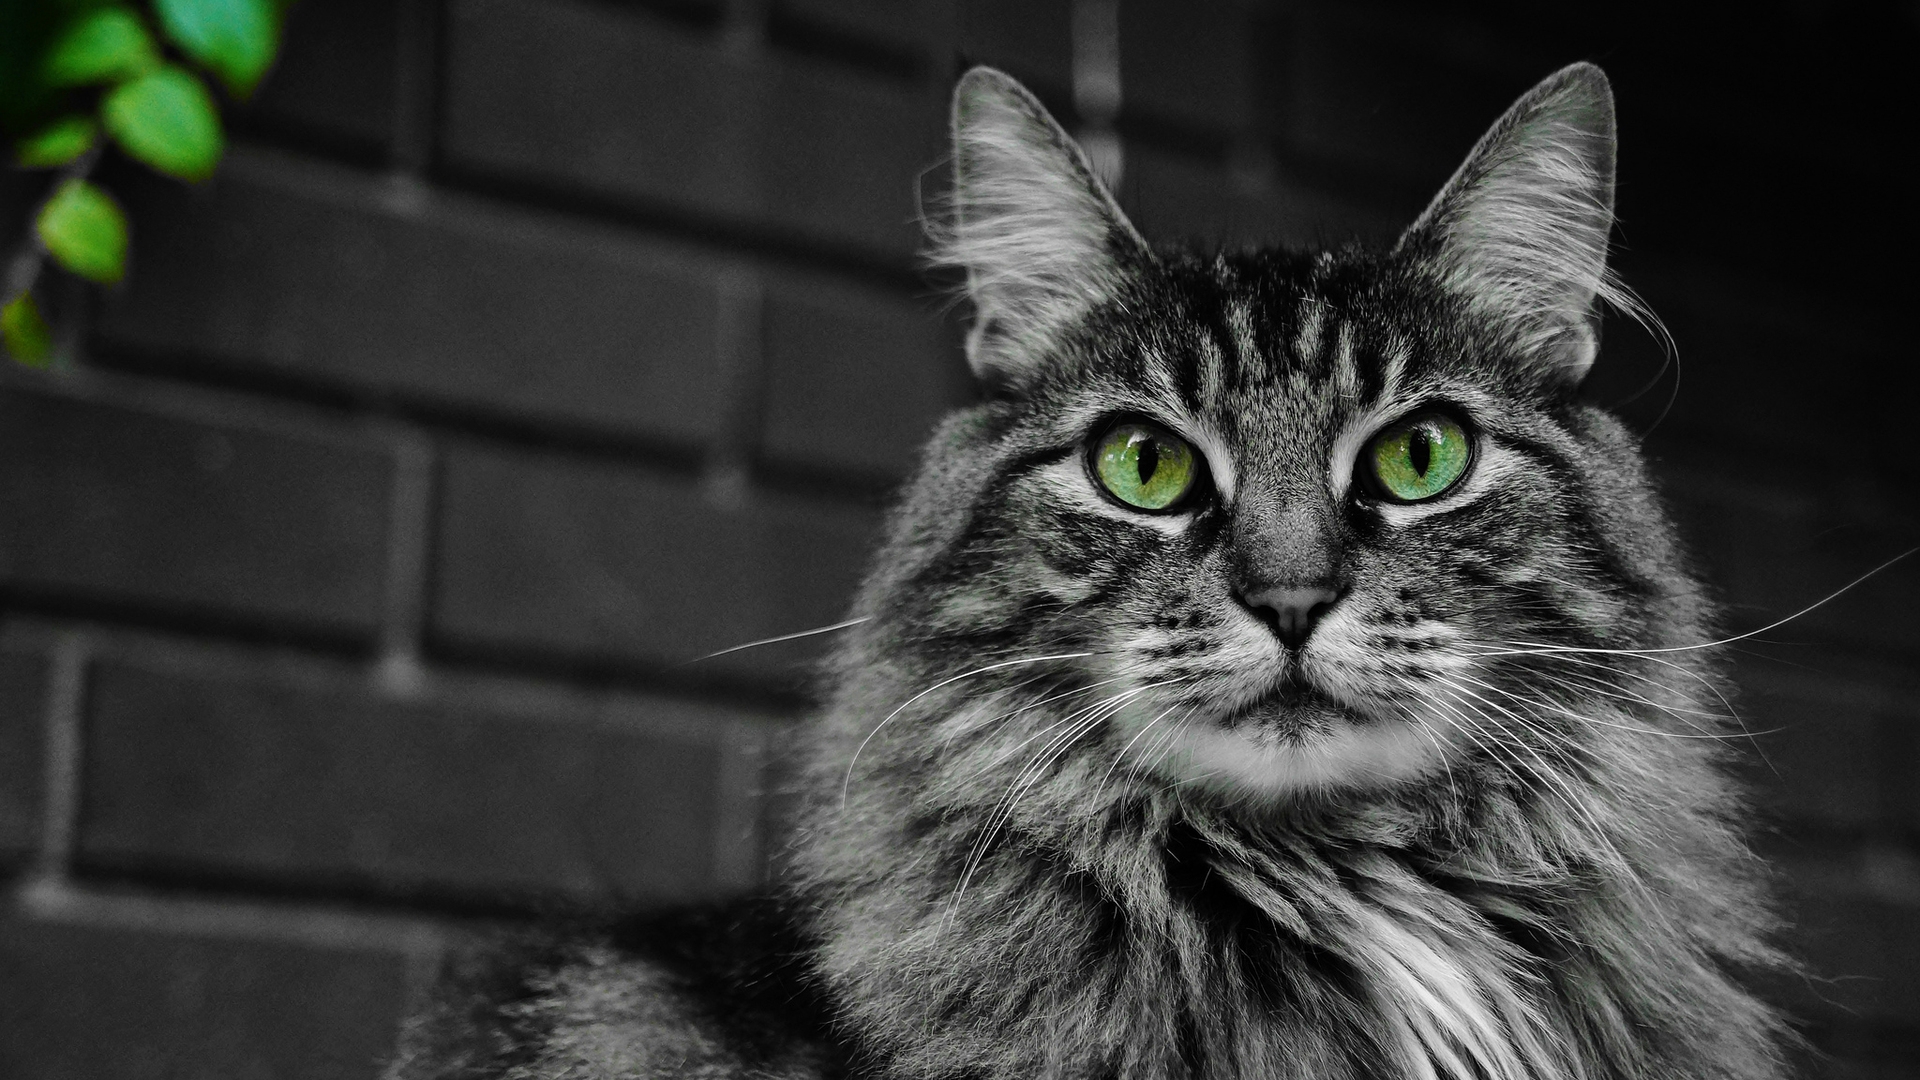 Fluffy Cat with Green Eyes for 1920 x 1080 HDTV 1080p resolution